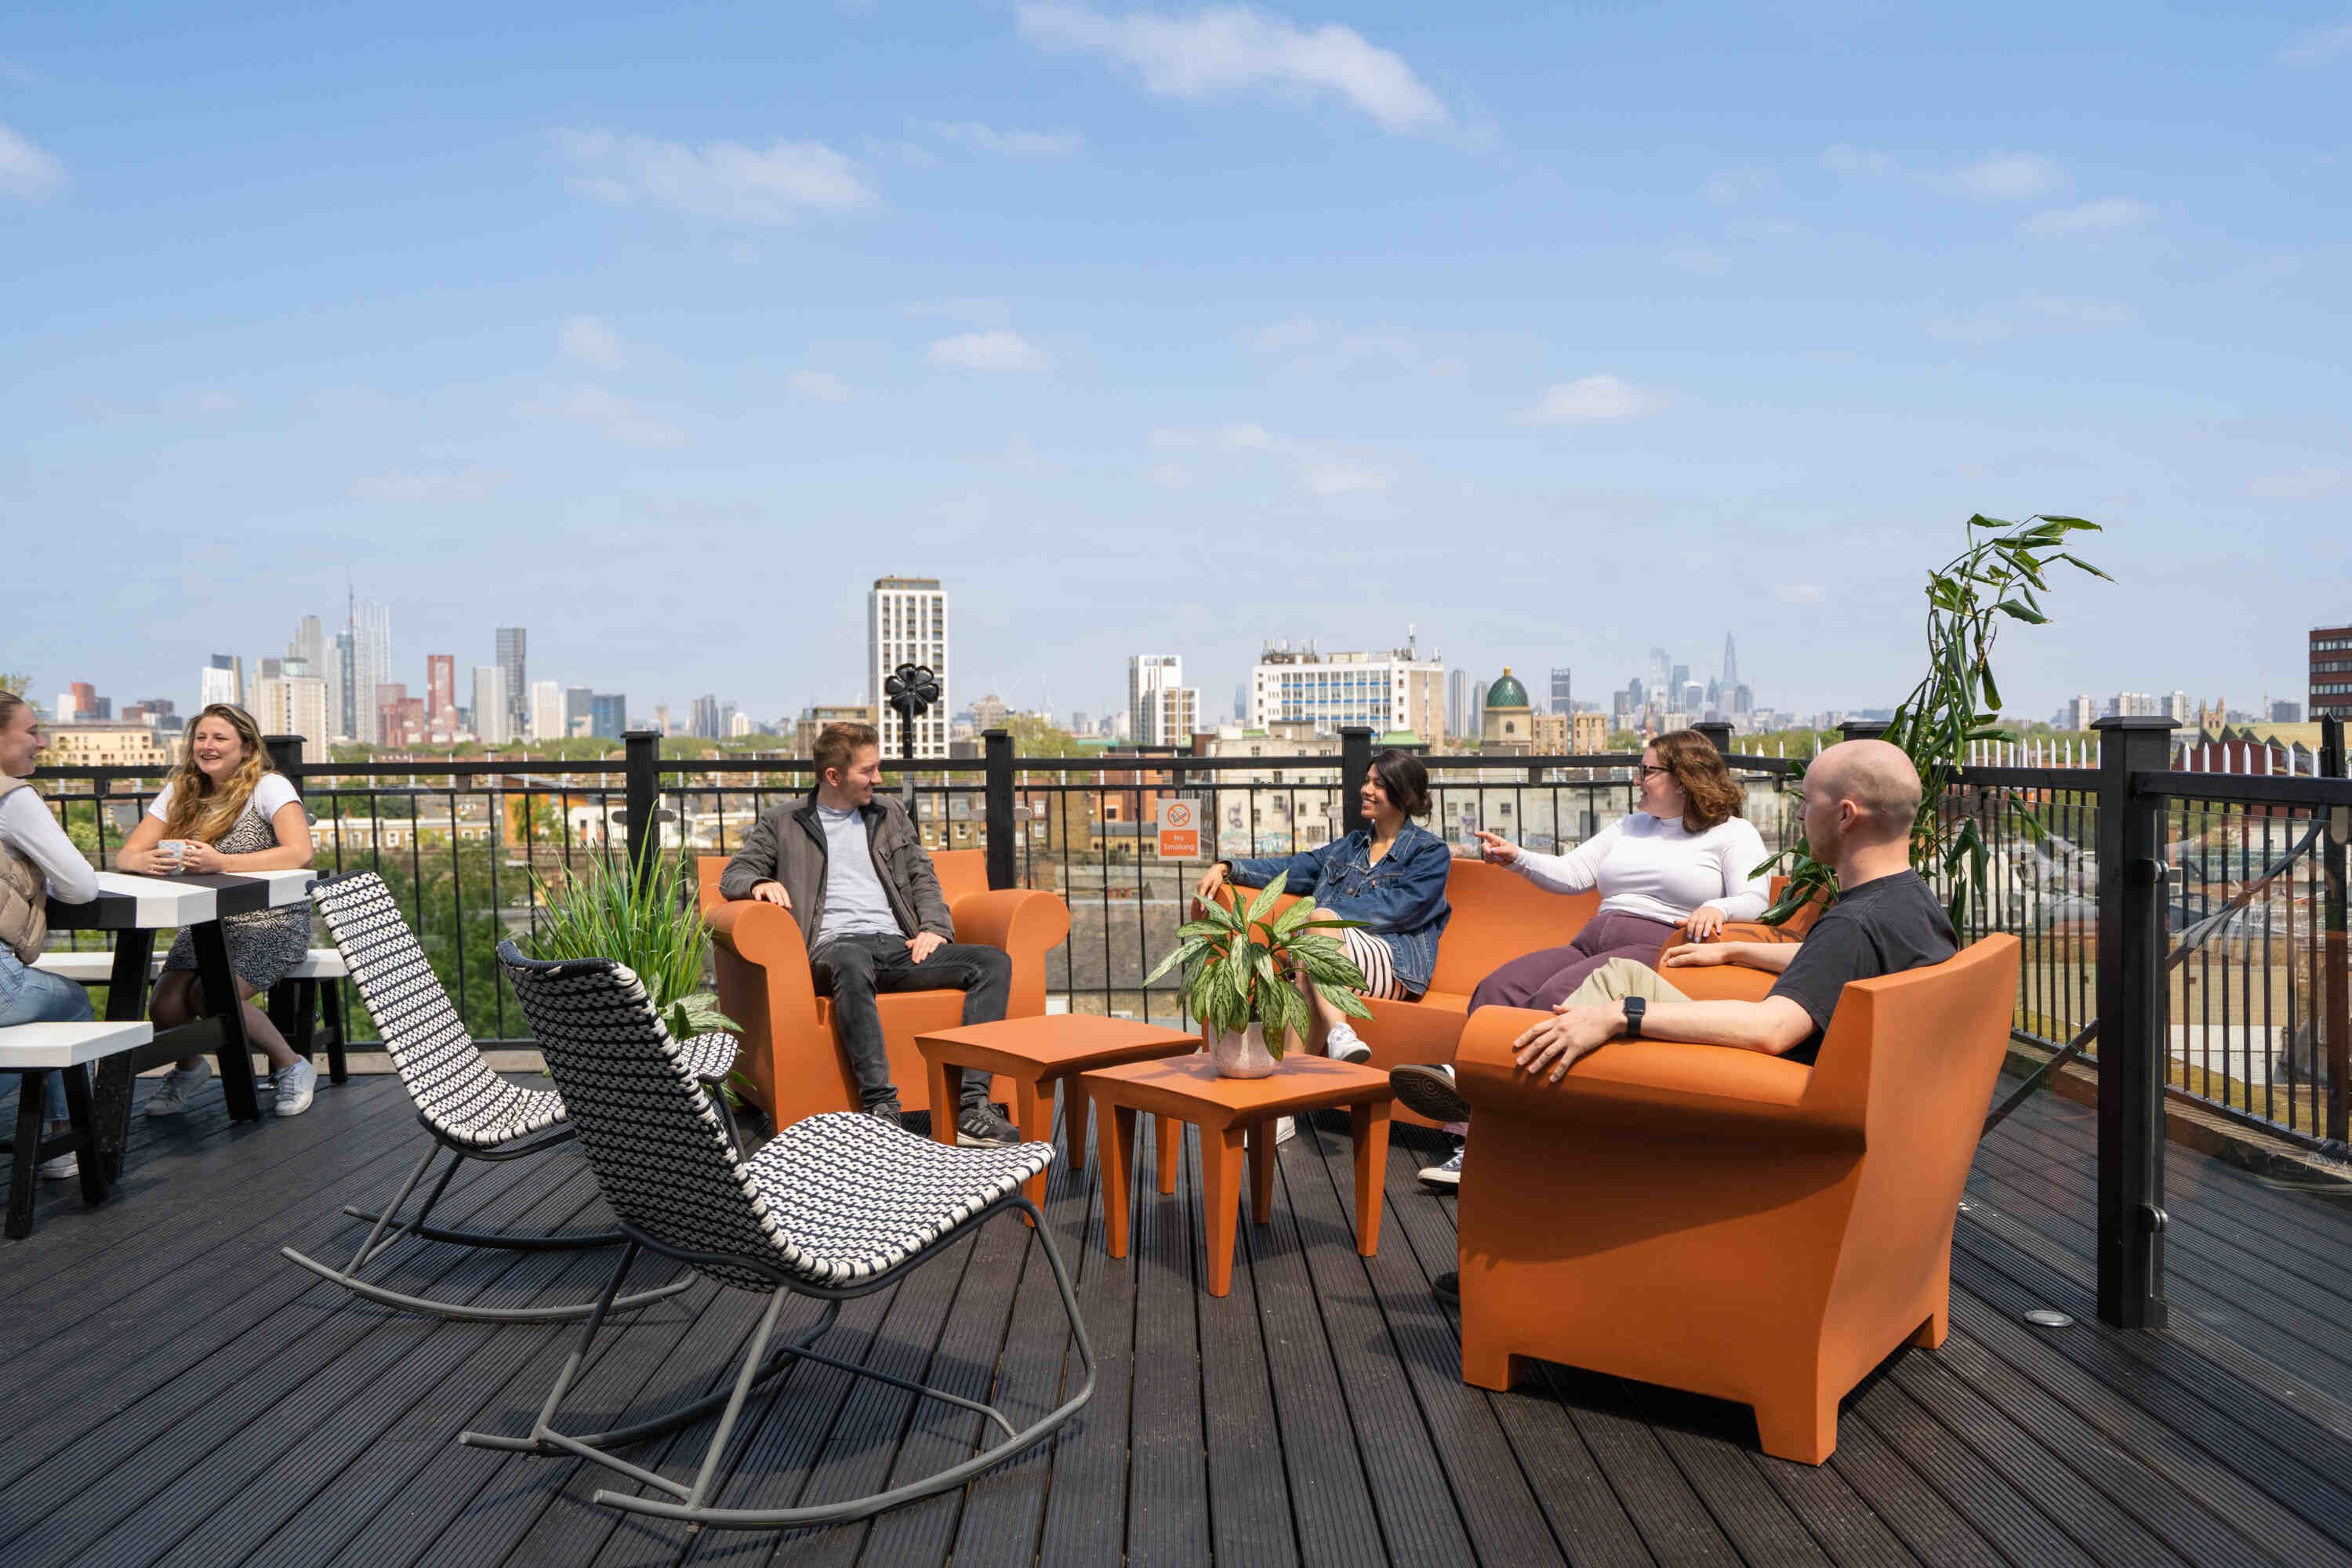 TCN Piano House Brixton Rooftop Terrace With Members Seated On Chairs